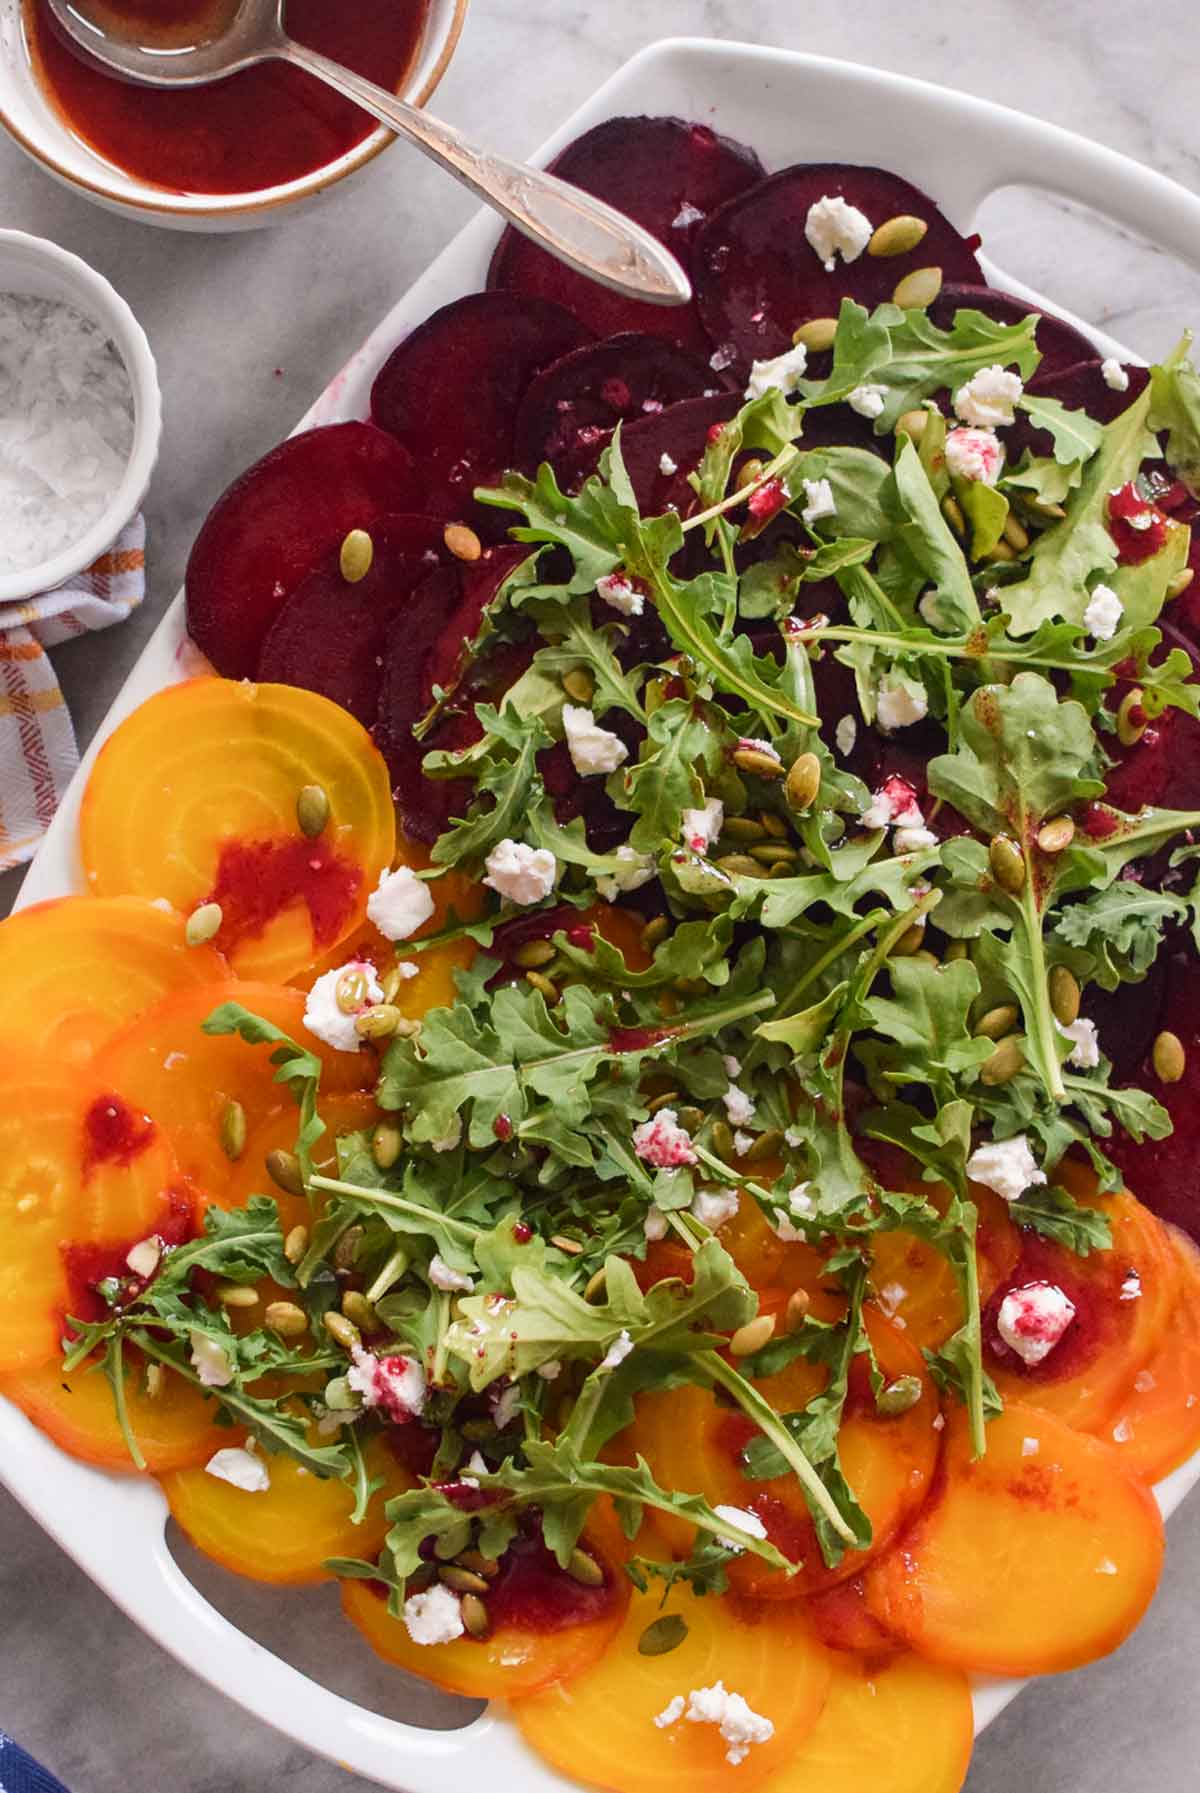 Sliced beets on a plate with arugula and pepitas.